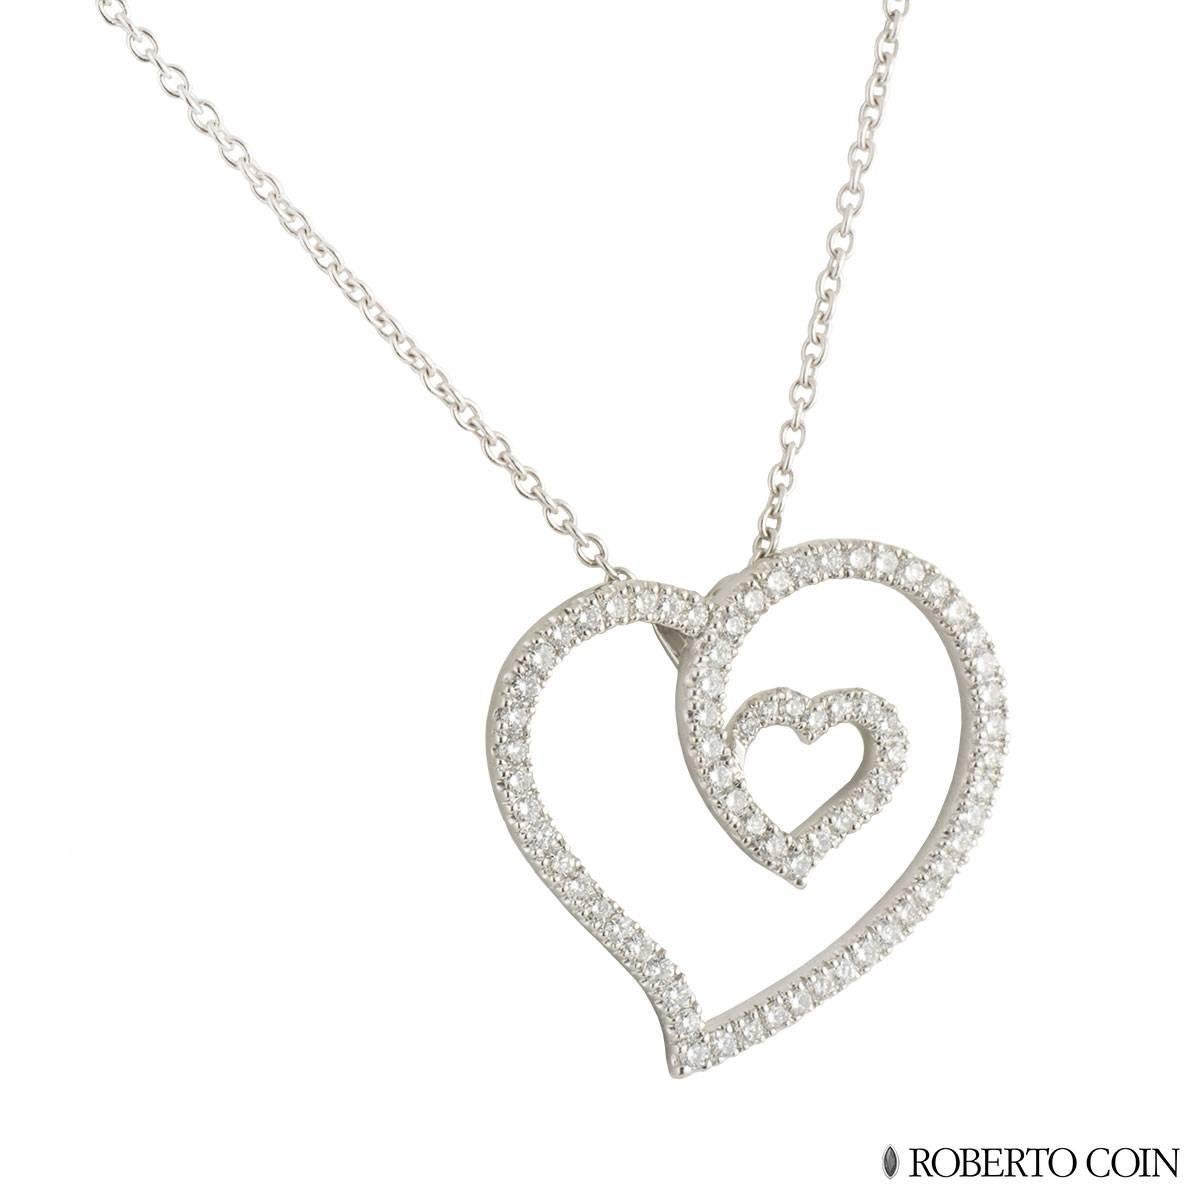 A stylish 18k white gold diamond Roberto Coin heart pendant. The pendant comprises of an open work double heart motif with 74 round brilliant cut diamonds in a shared claw setting. The diamonds have a total weight of approximately 0.96ct, G colour,